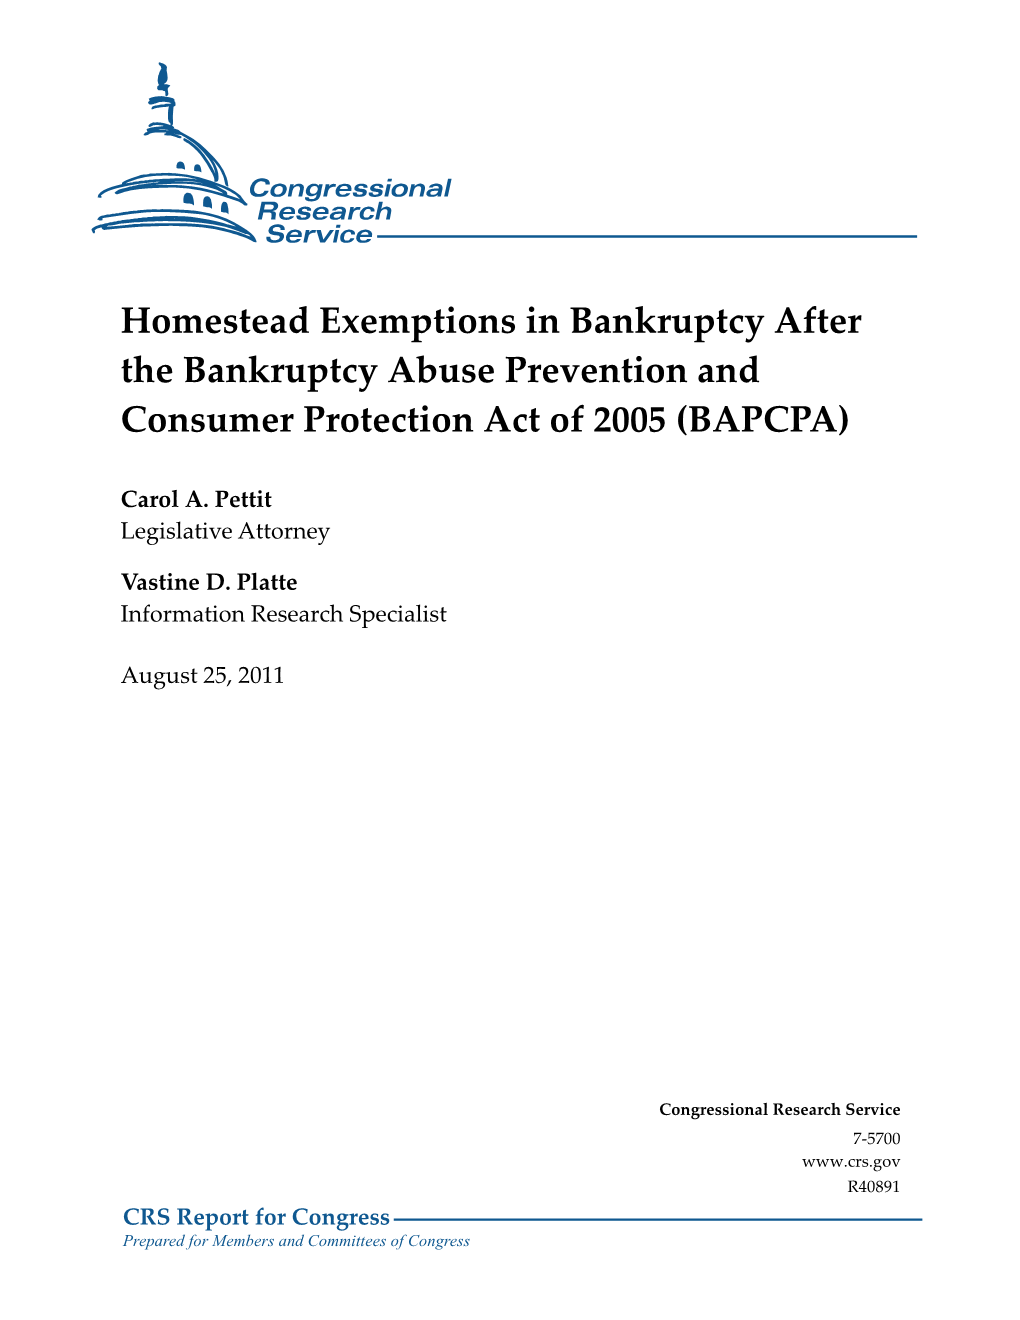 Homestead Exemptions in Bankruptcy After the Bankruptcy Abuse Prevention and Consumer Protection Act of 2005 (BAPCPA)